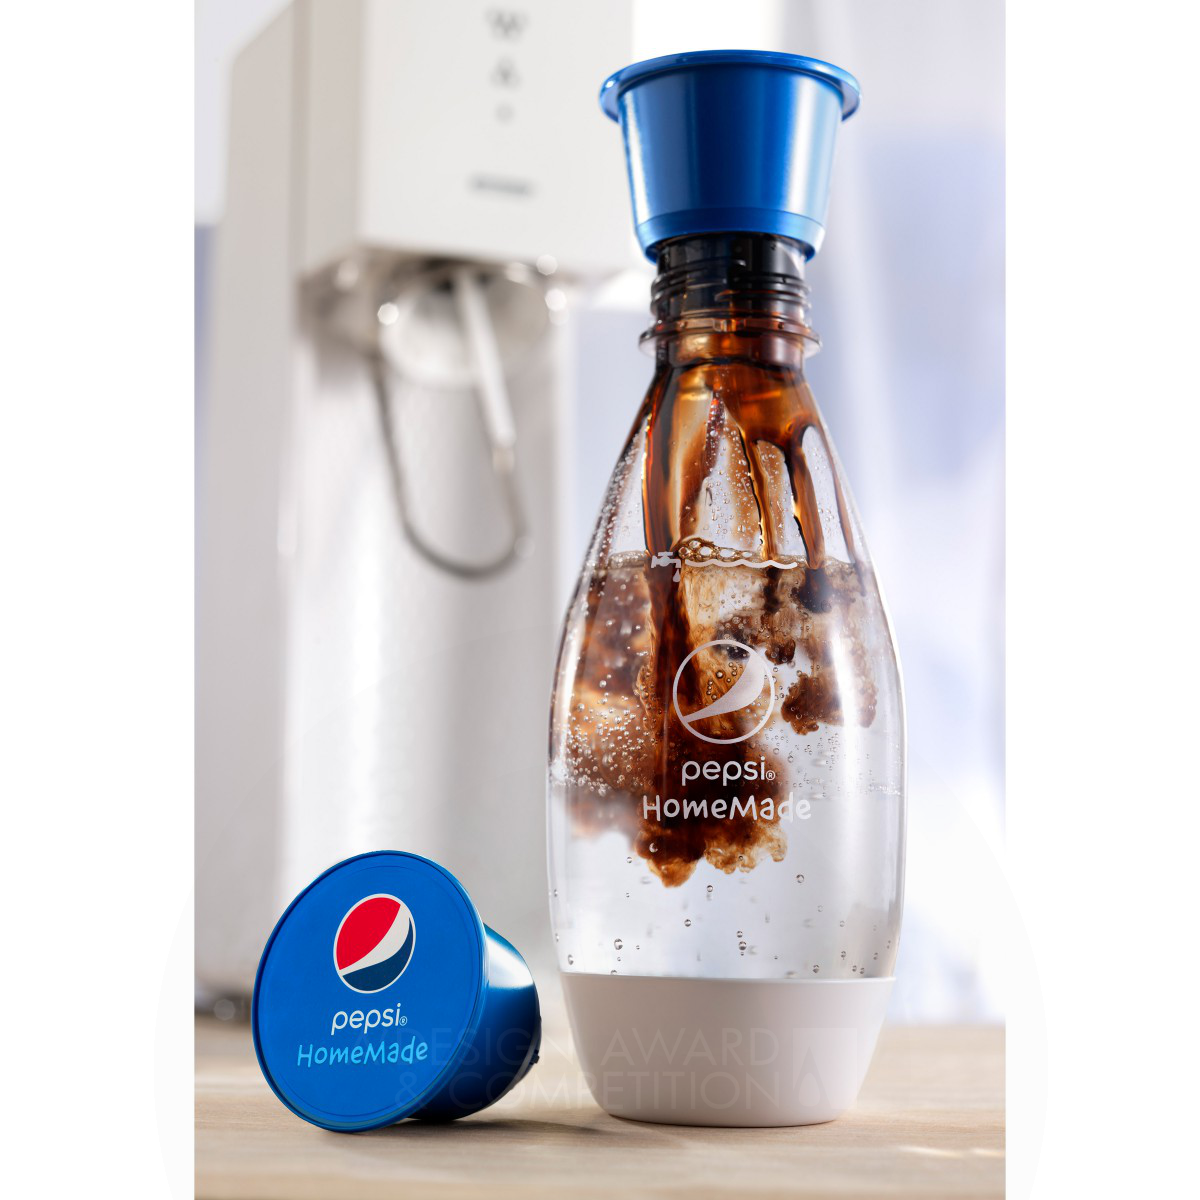 Pepsi Homemade Carbination Product by PepsiCo Design & Innovation